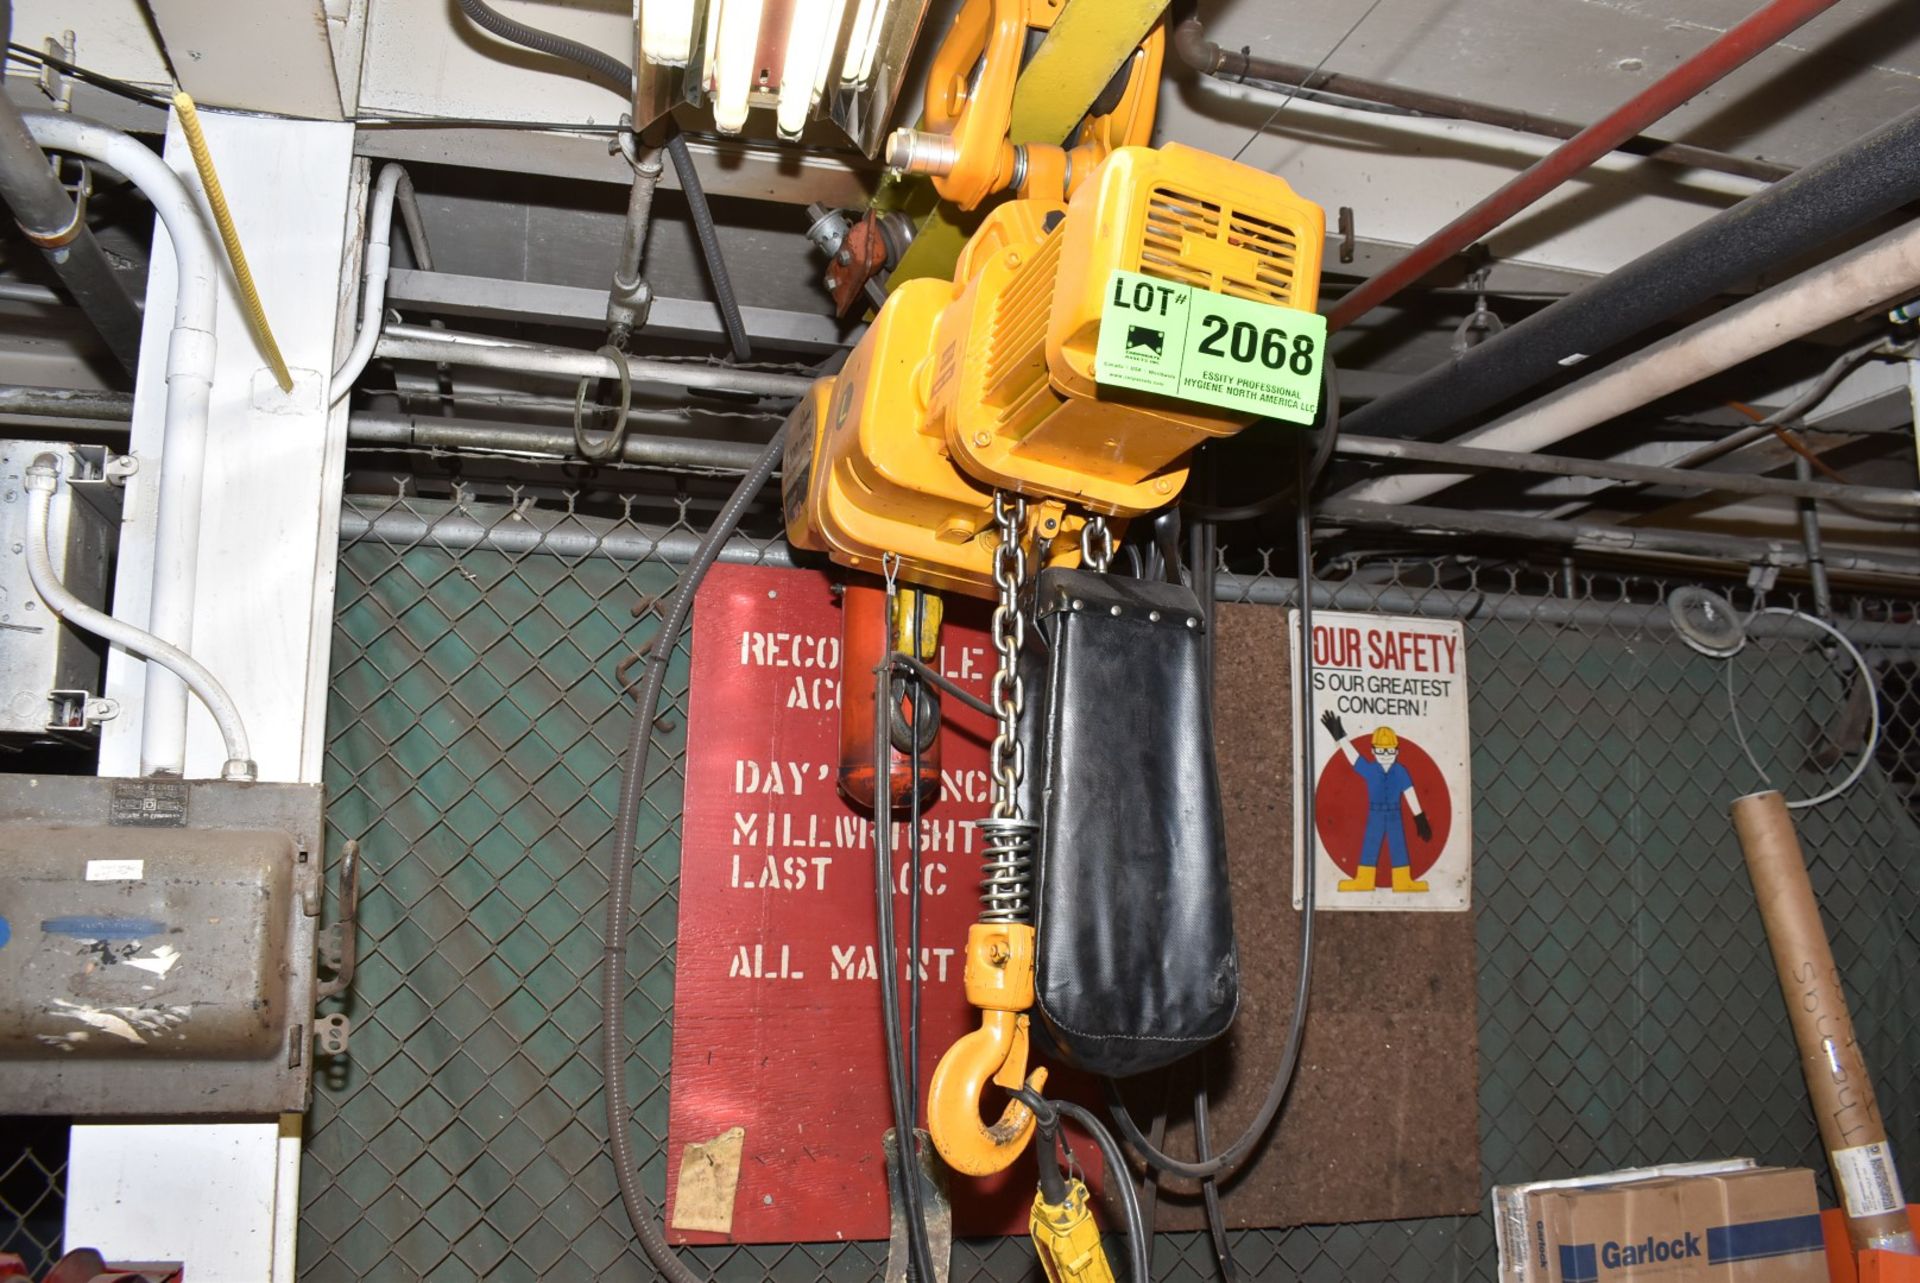 INGERSOLL-RAND QUANTUM 1 TON ELECTRIC HOIST WITH PENDENT CONTROL, S/N N/A (CI) [RIGGING FEES FOR LOT